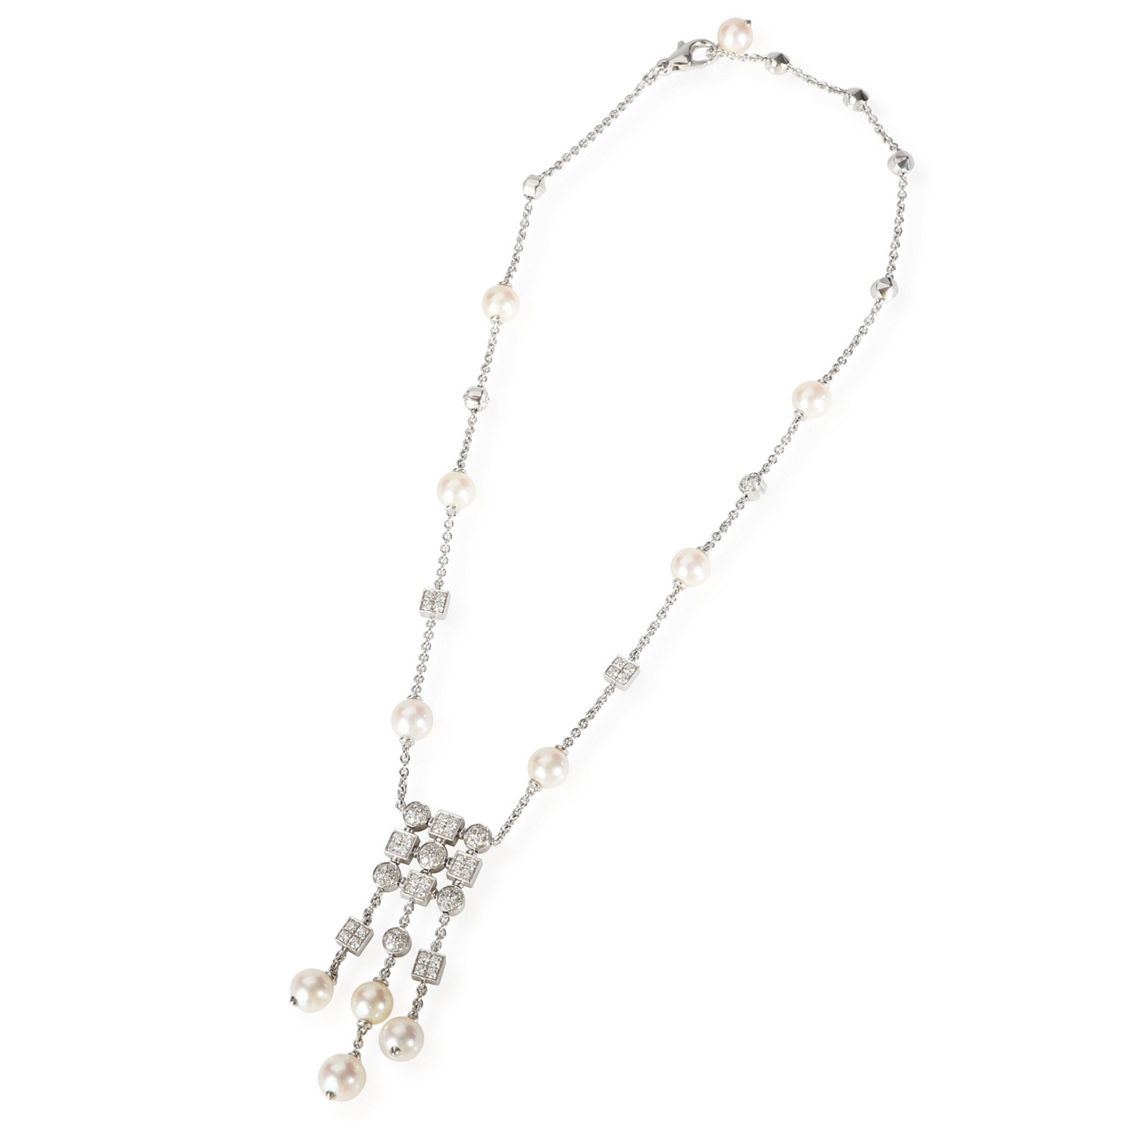 BVLGARI Lucea Necklace Pre-Owned - Image 2 of 4